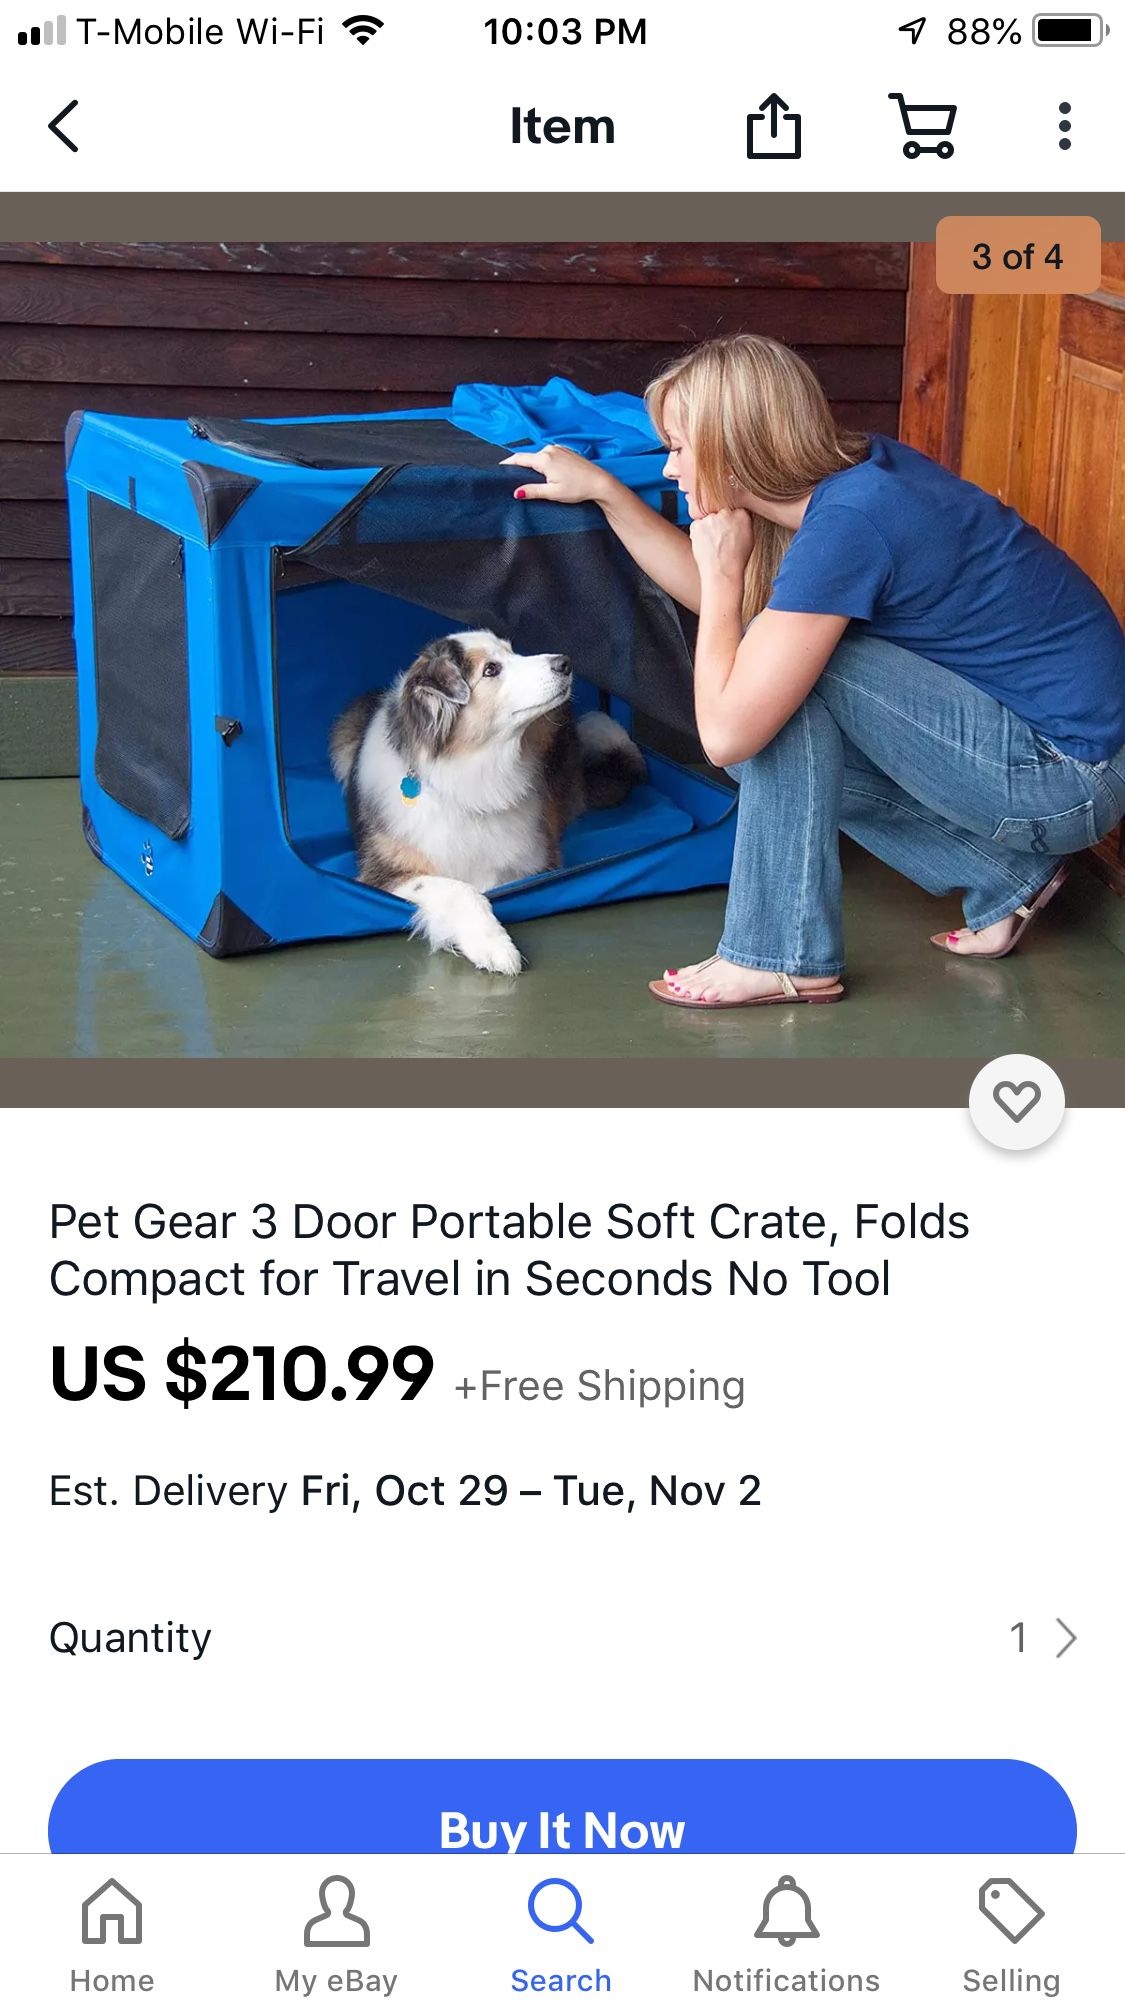 Pet Gear 3 Door Portable Soft Crate, Folds Compact for Travel in Seconds No Tool